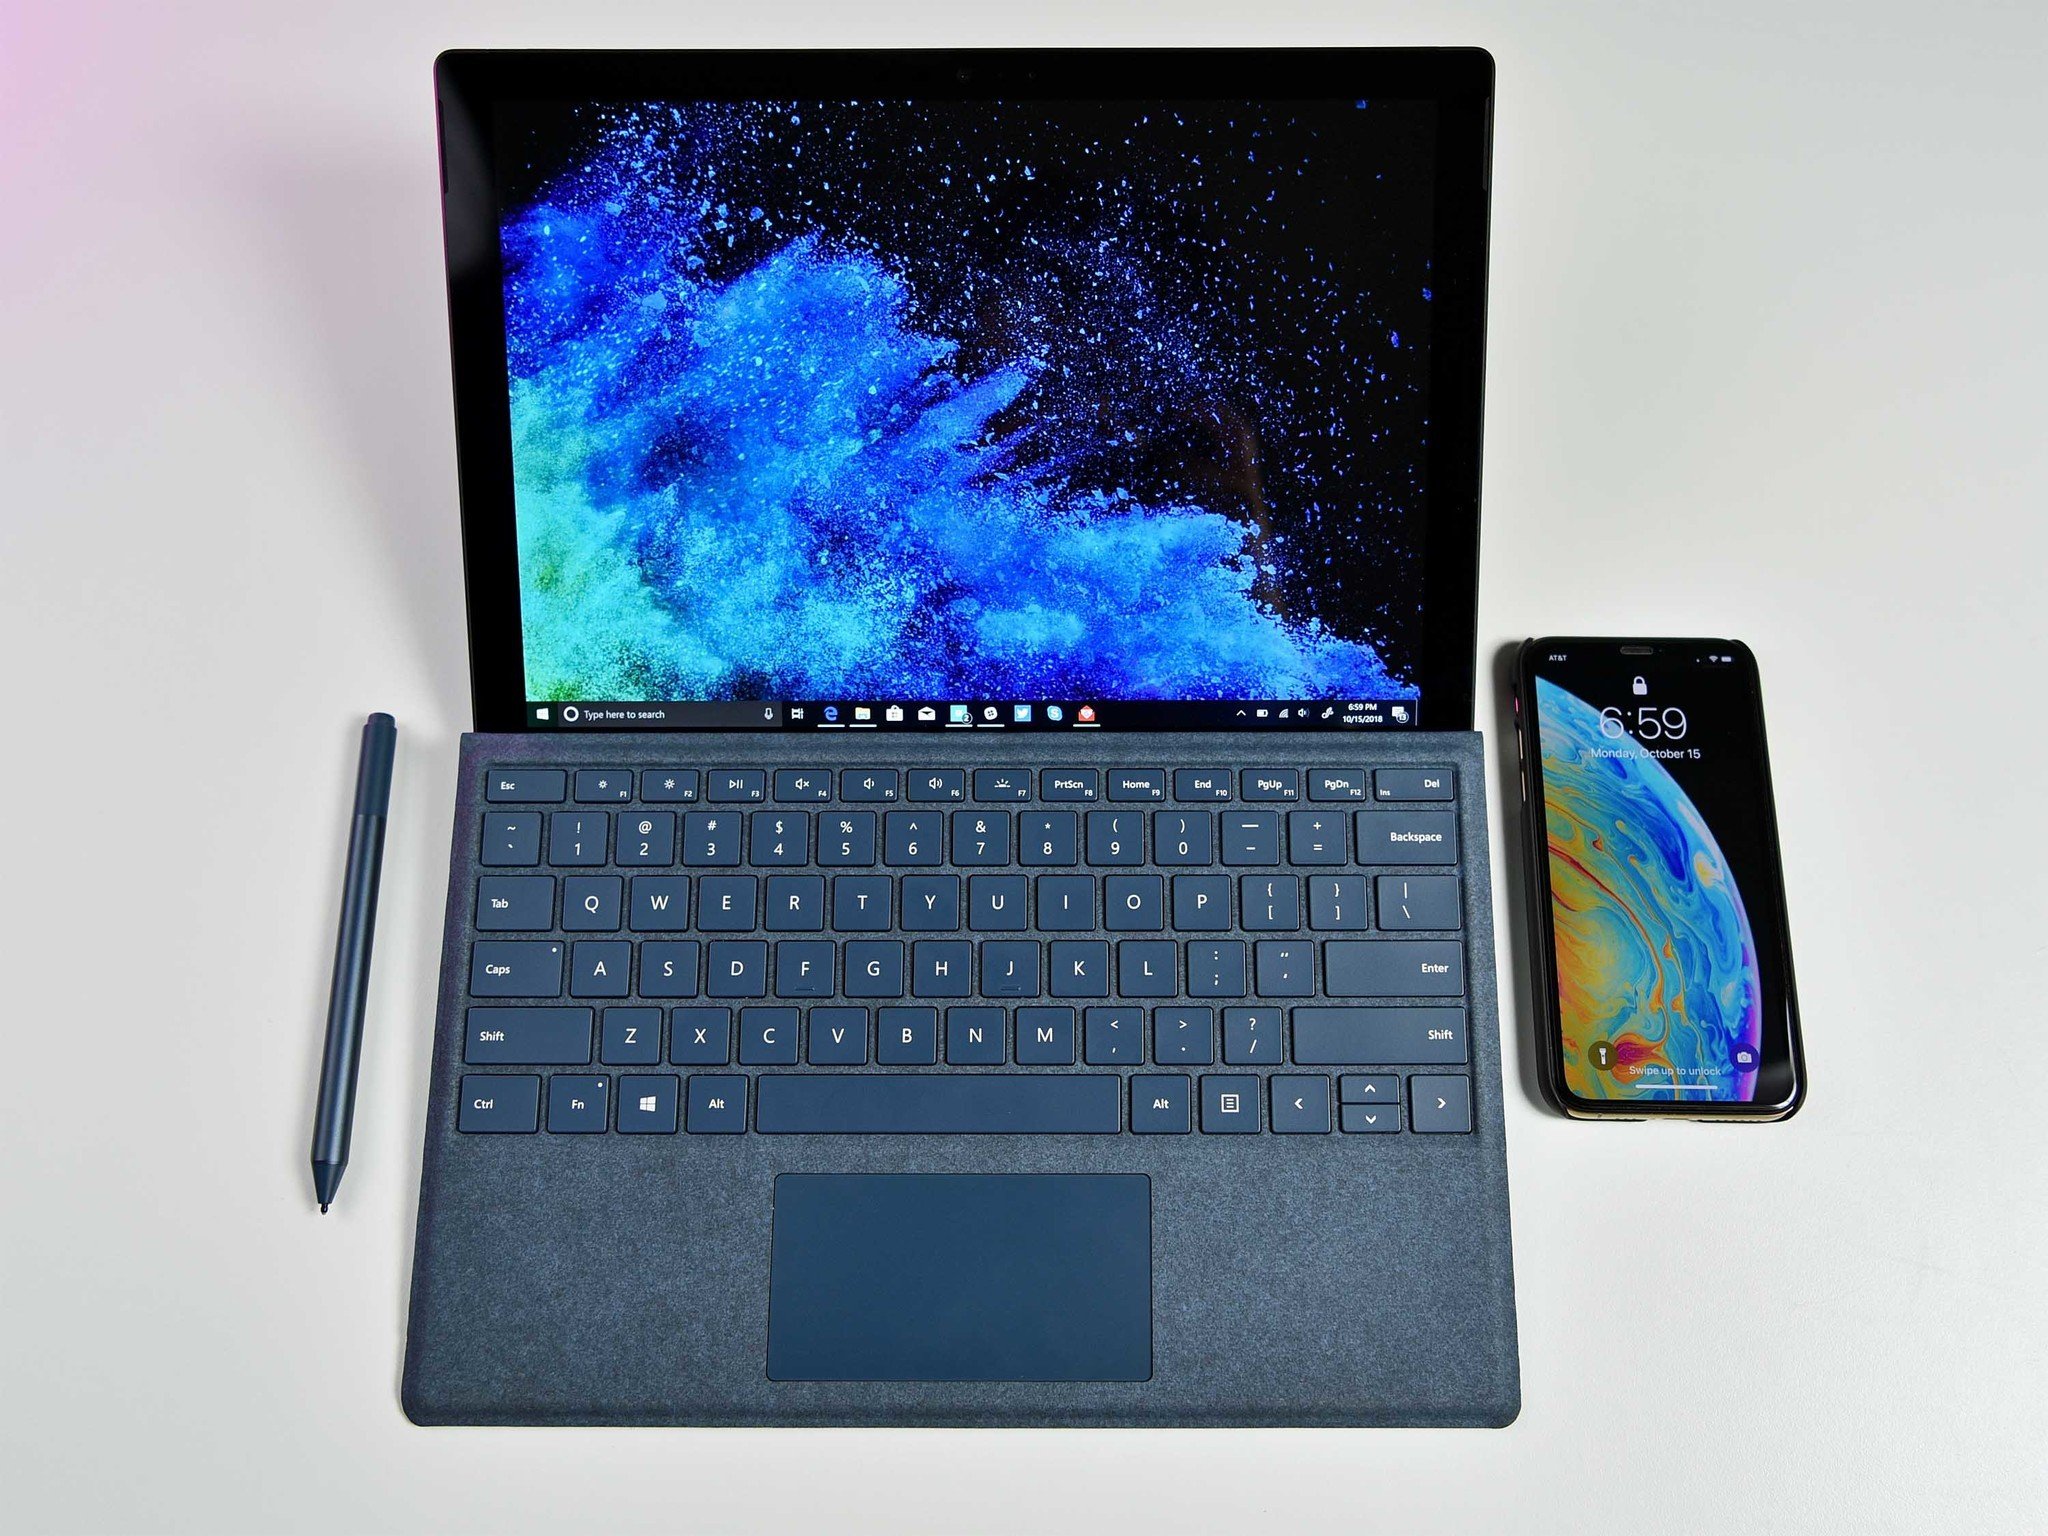 Microsoft Surface Pro 6 review: An already exceptional 2-in-1 gets even